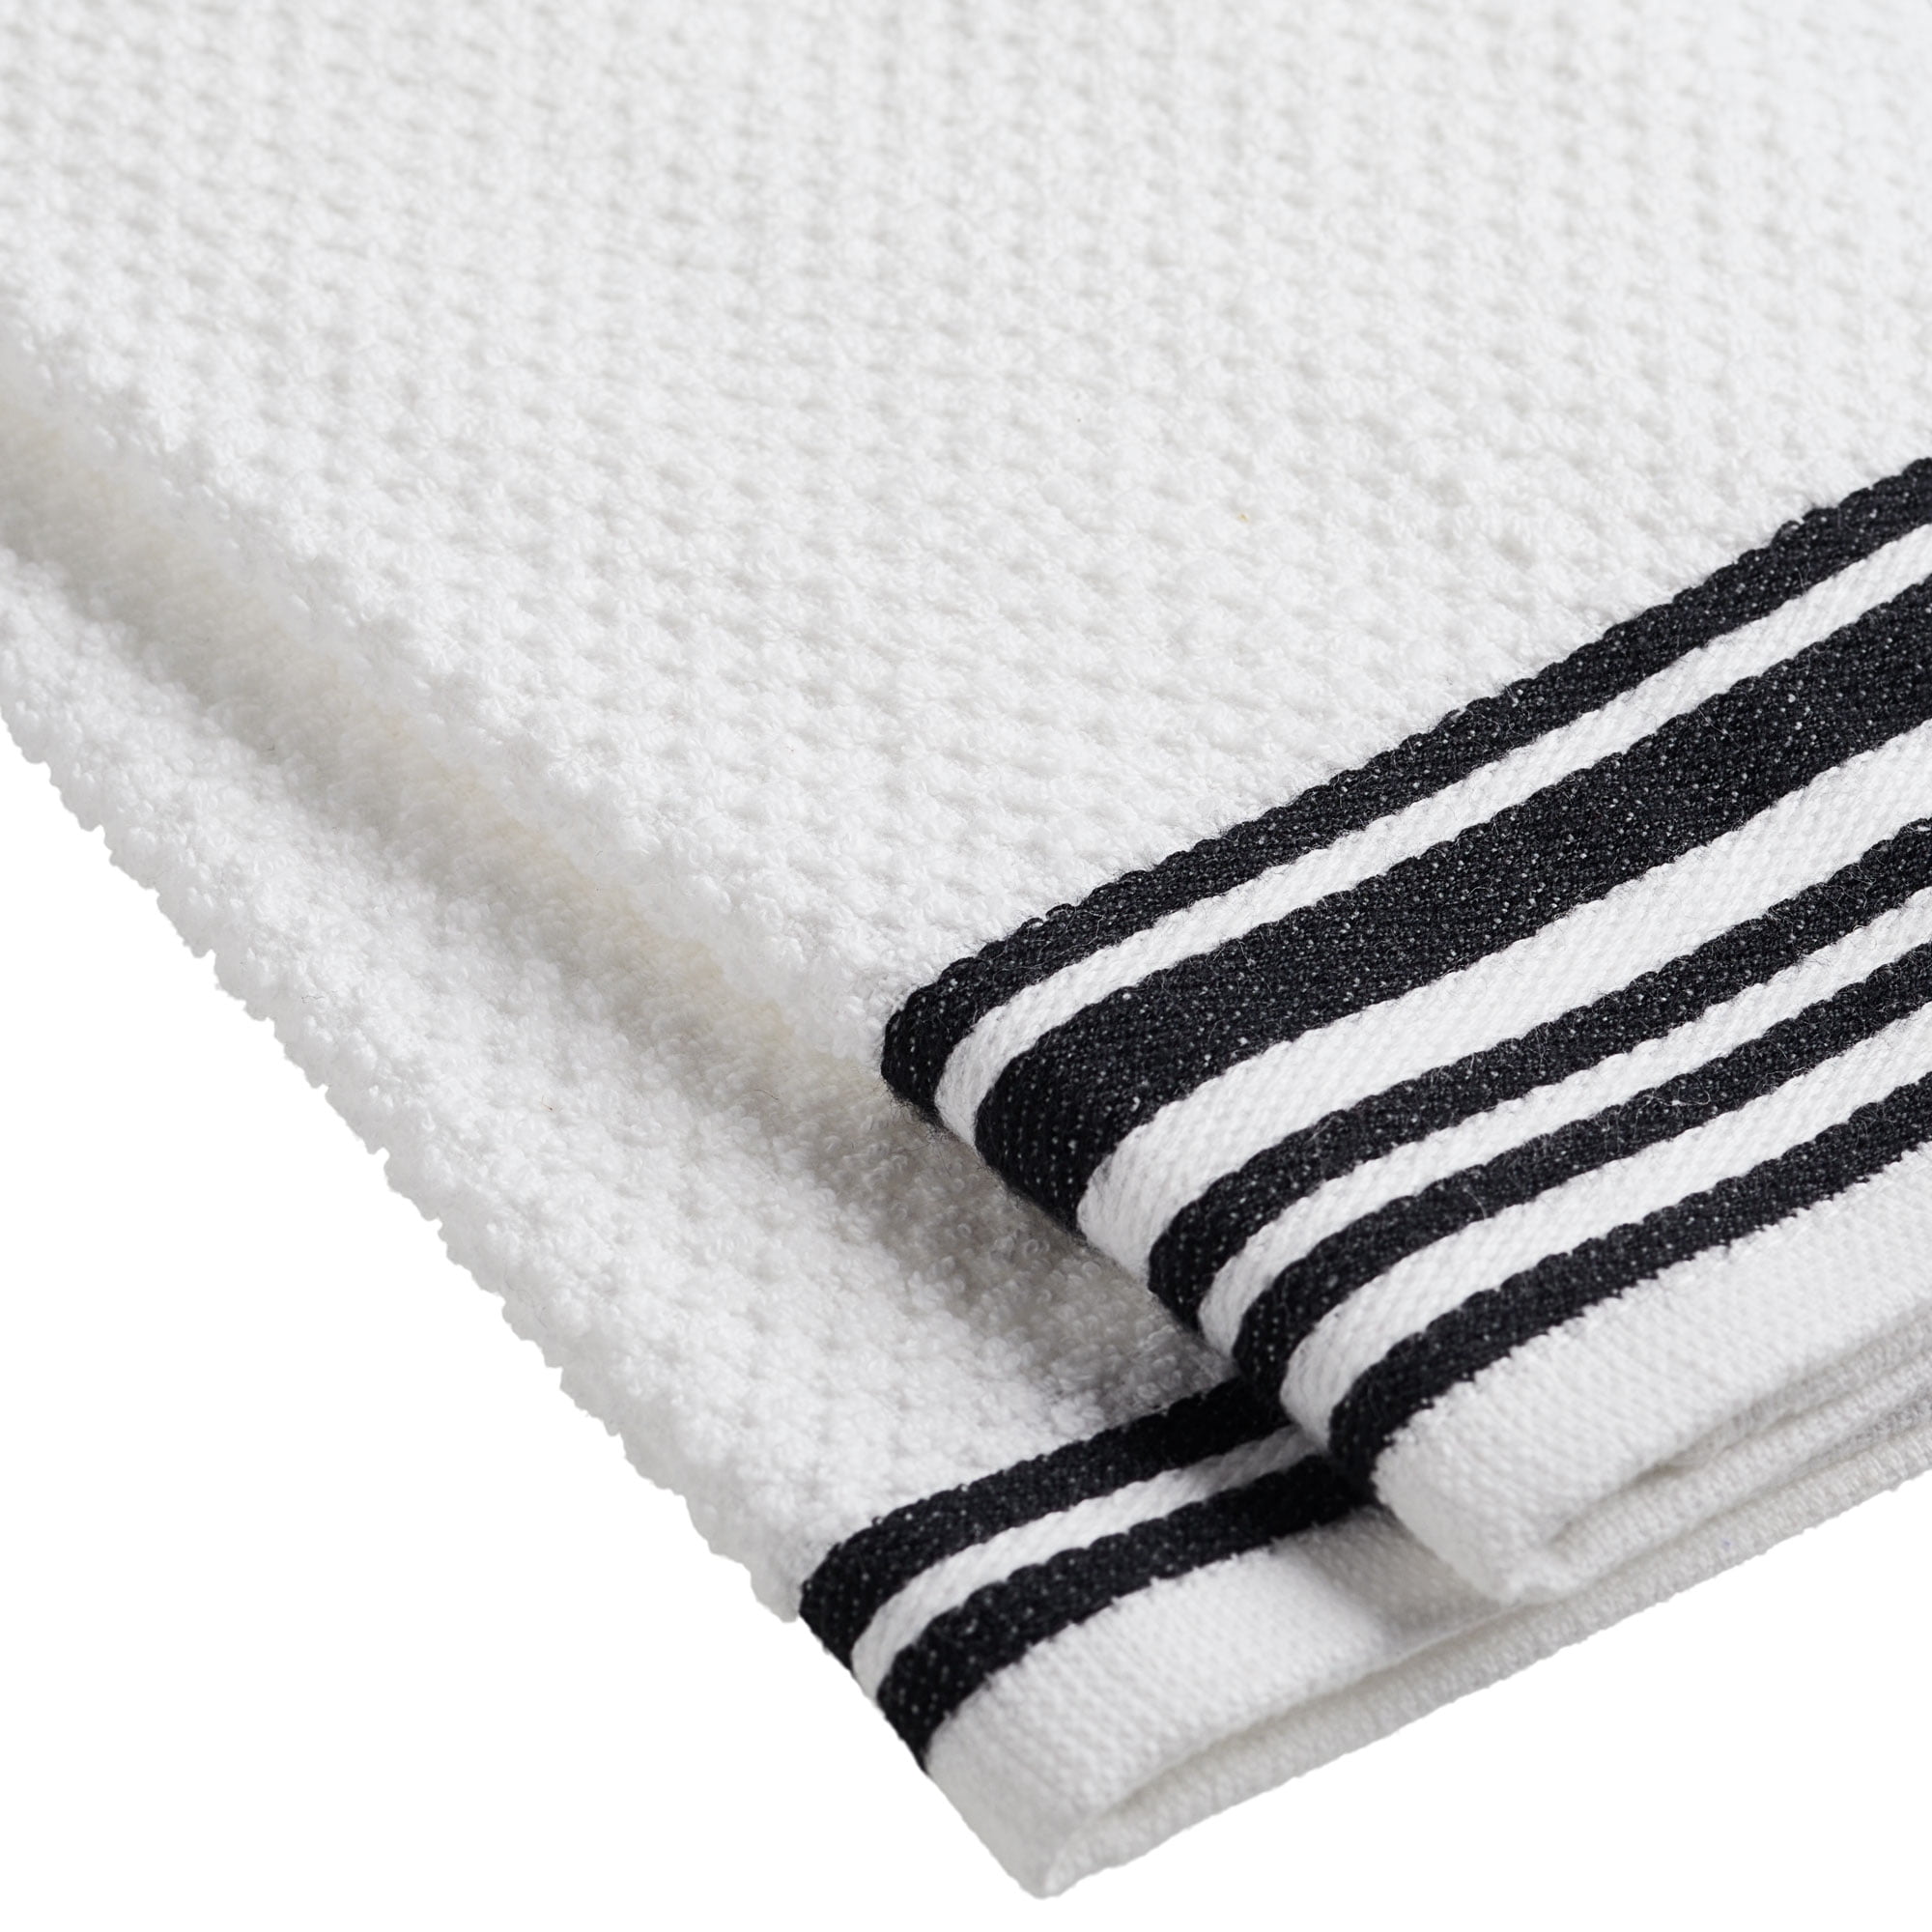 Mellow Buff 100% Cotton Terry Dish Towels, 4 Pack Checks, 16 x26 Inches,  Super Soft and Absorbent Kitchen Towels, Perfect for Kitchen Cleaning and